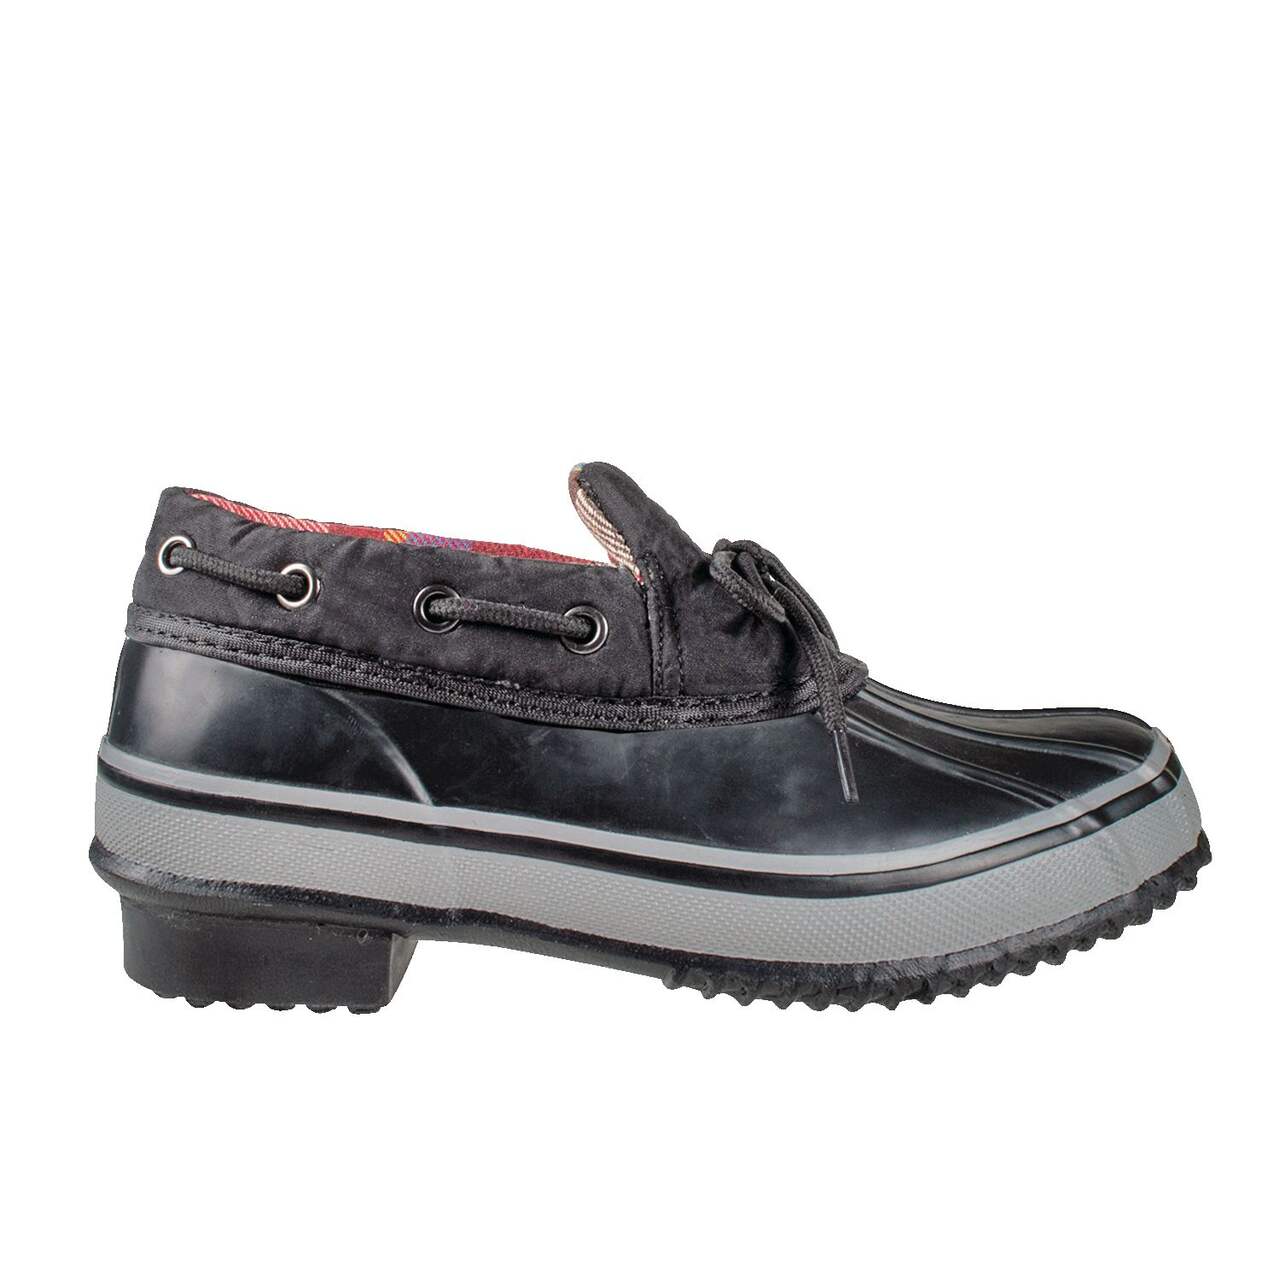 https://media-www.canadiantire.ca/product/playing/footwear-apparel/summer-footwear-apparel/1873433/slip-on-duck-shoe-women-size-6-24d25273-a207-4195-af15-c03932d3d34f-jpgrendition.jpg?imdensity=1&imwidth=1244&impolicy=mZoom